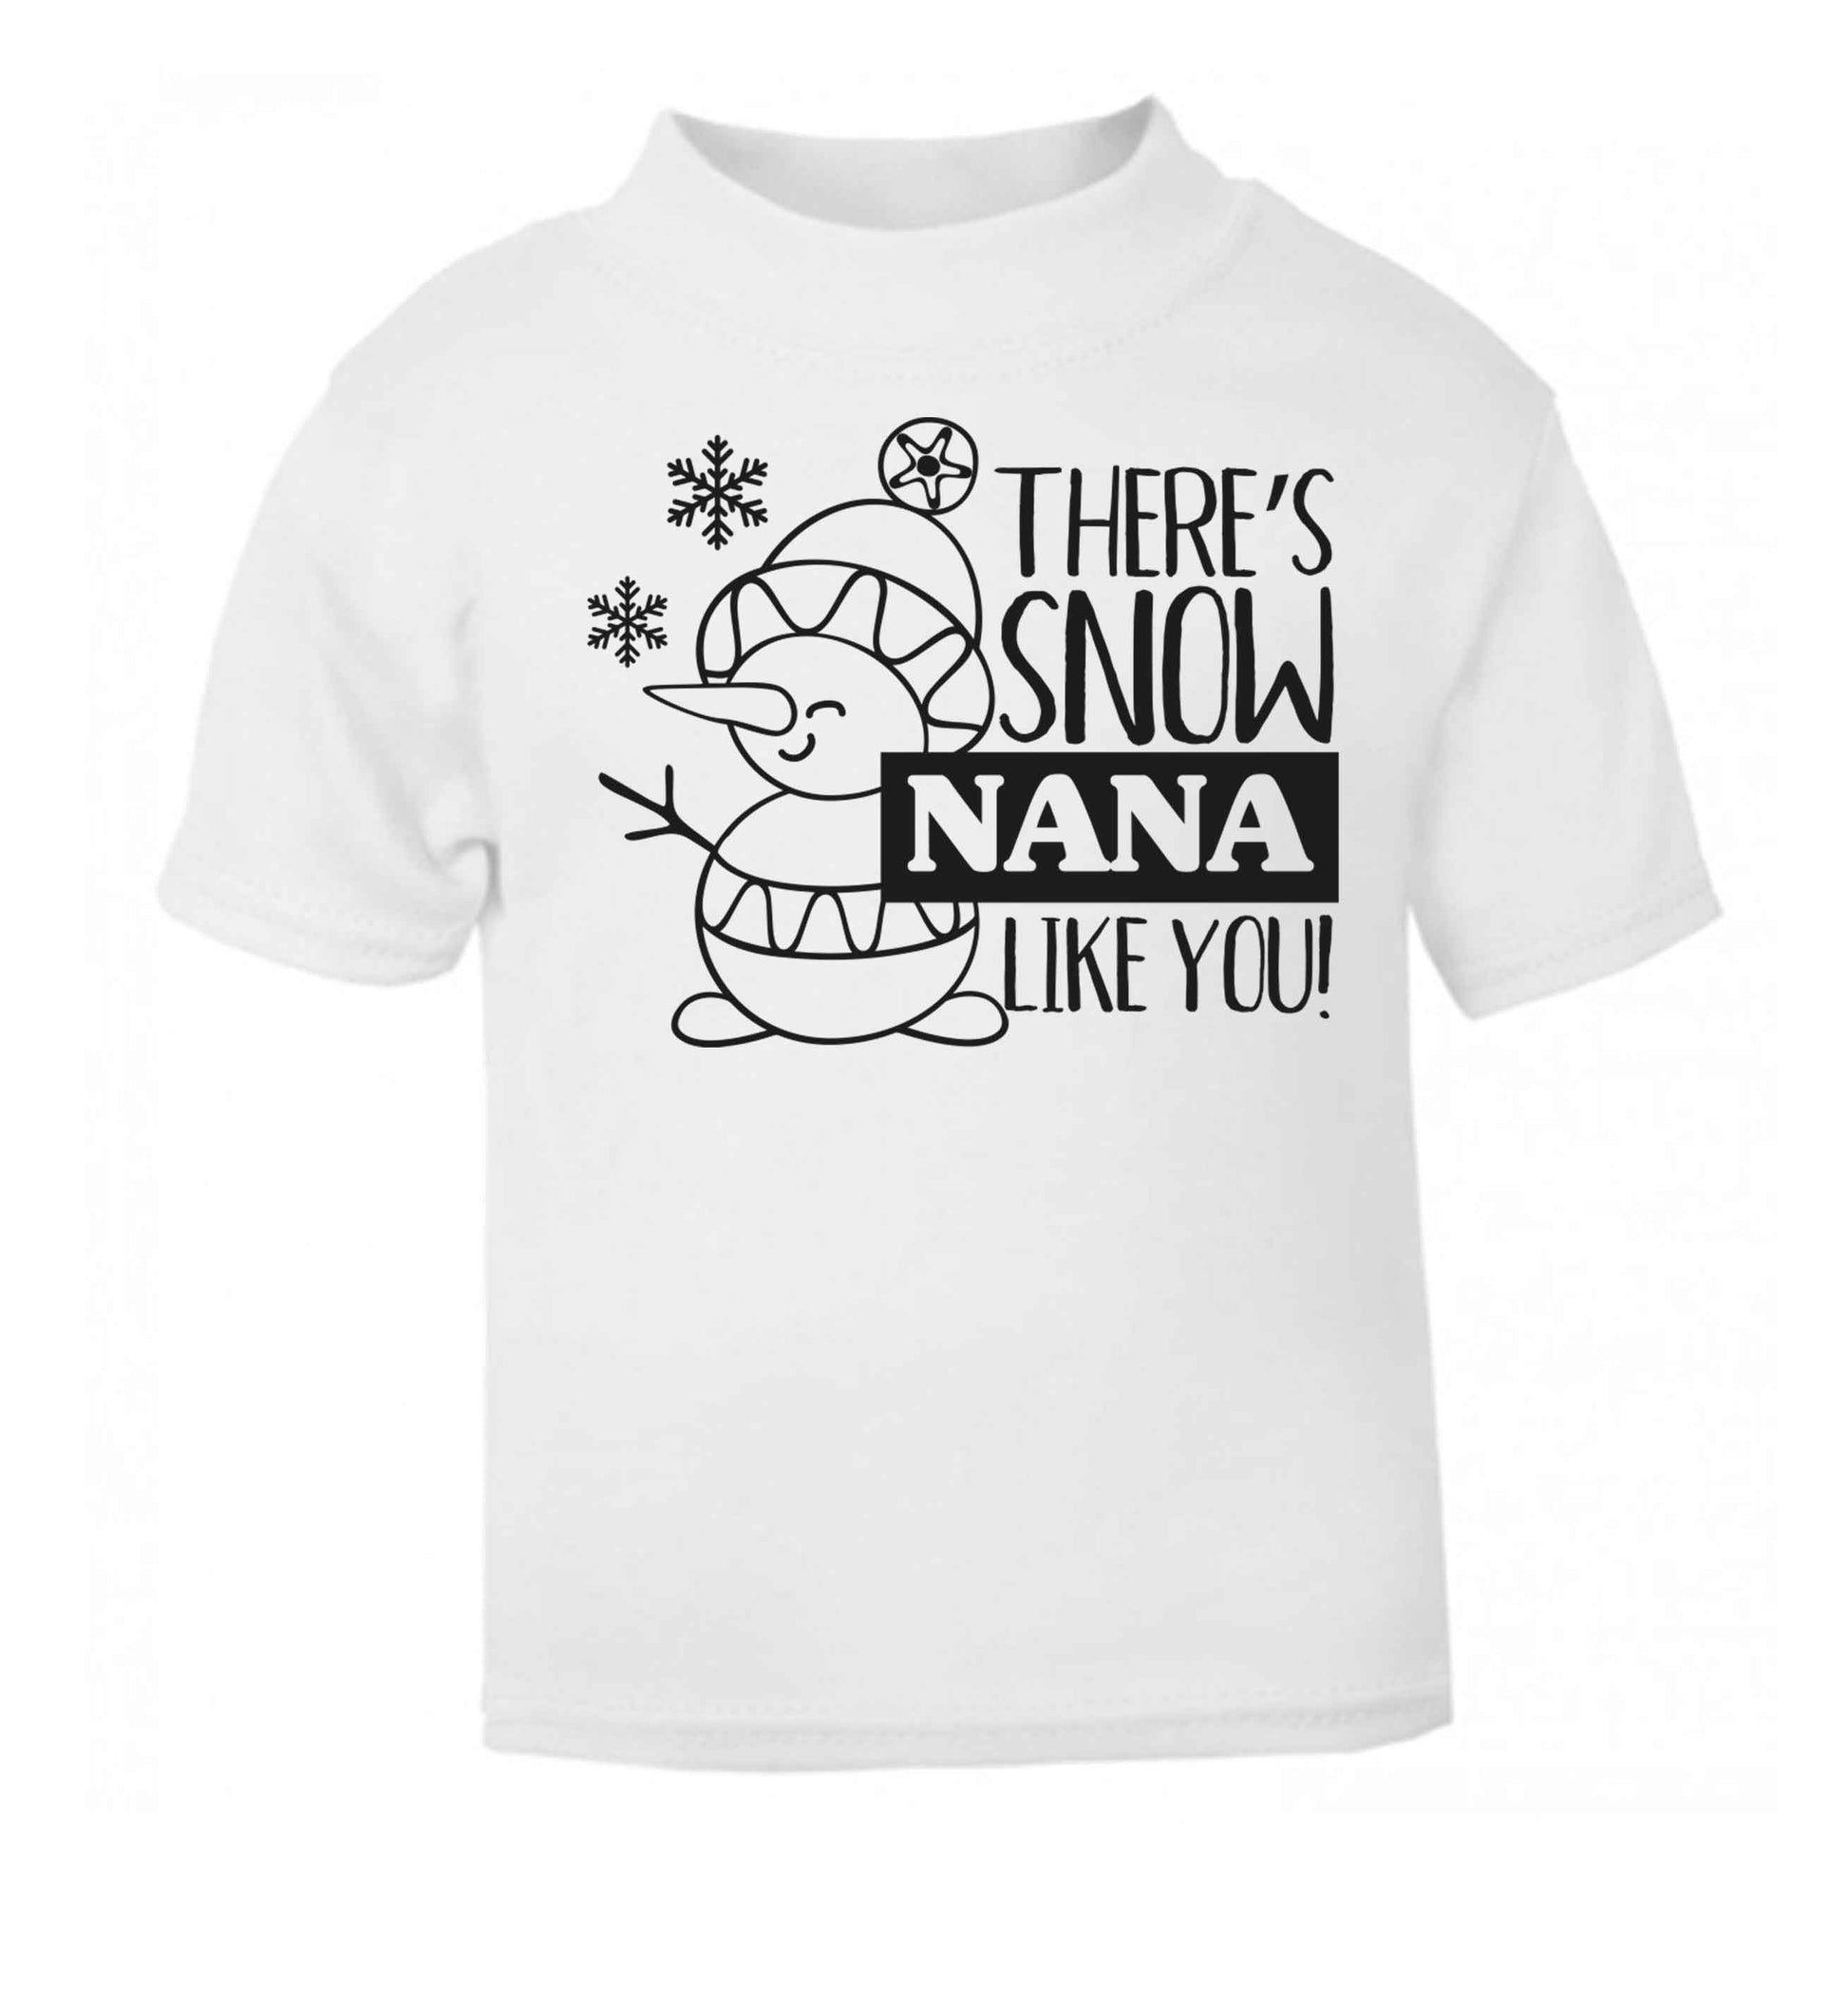 There's snow nana like you white baby toddler Tshirt 2 Years